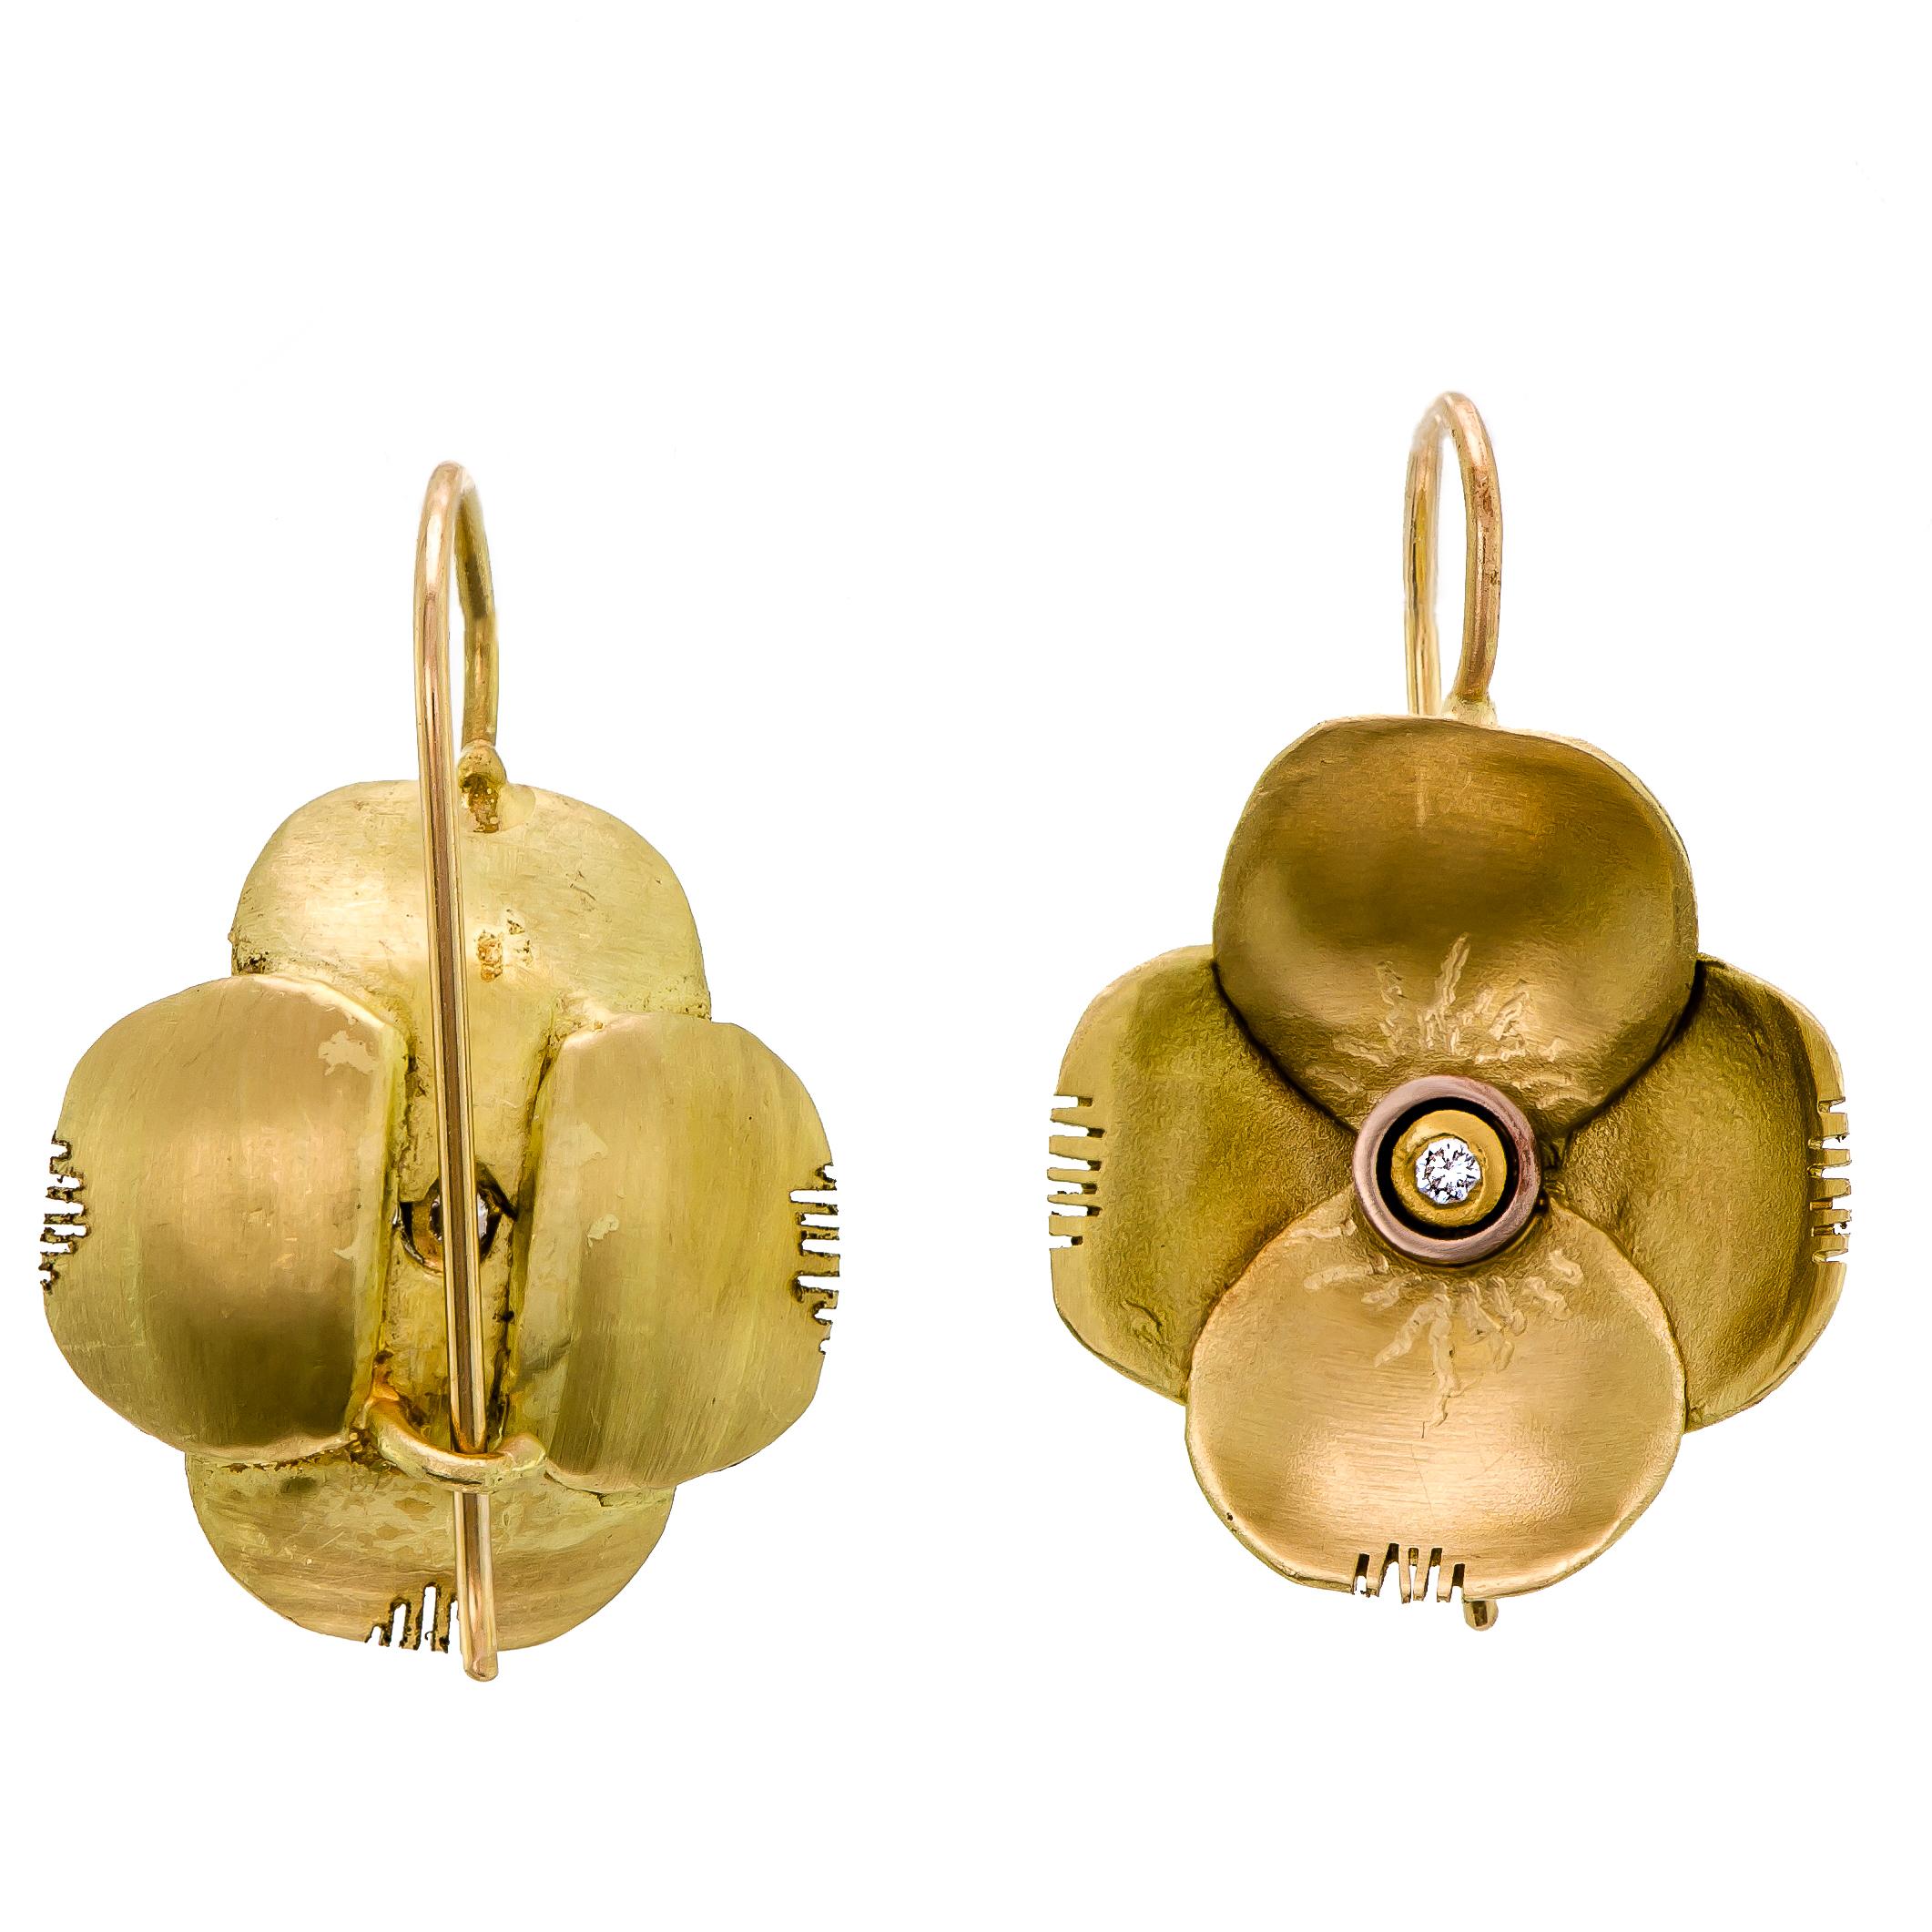 Lovely 22 Karat diamond brushed gold flower pansy form wire back earrings each bezel set with one round small full-cut diamond at the center. Very good condition. Beautiful on the ear.

Measurements: 3/4